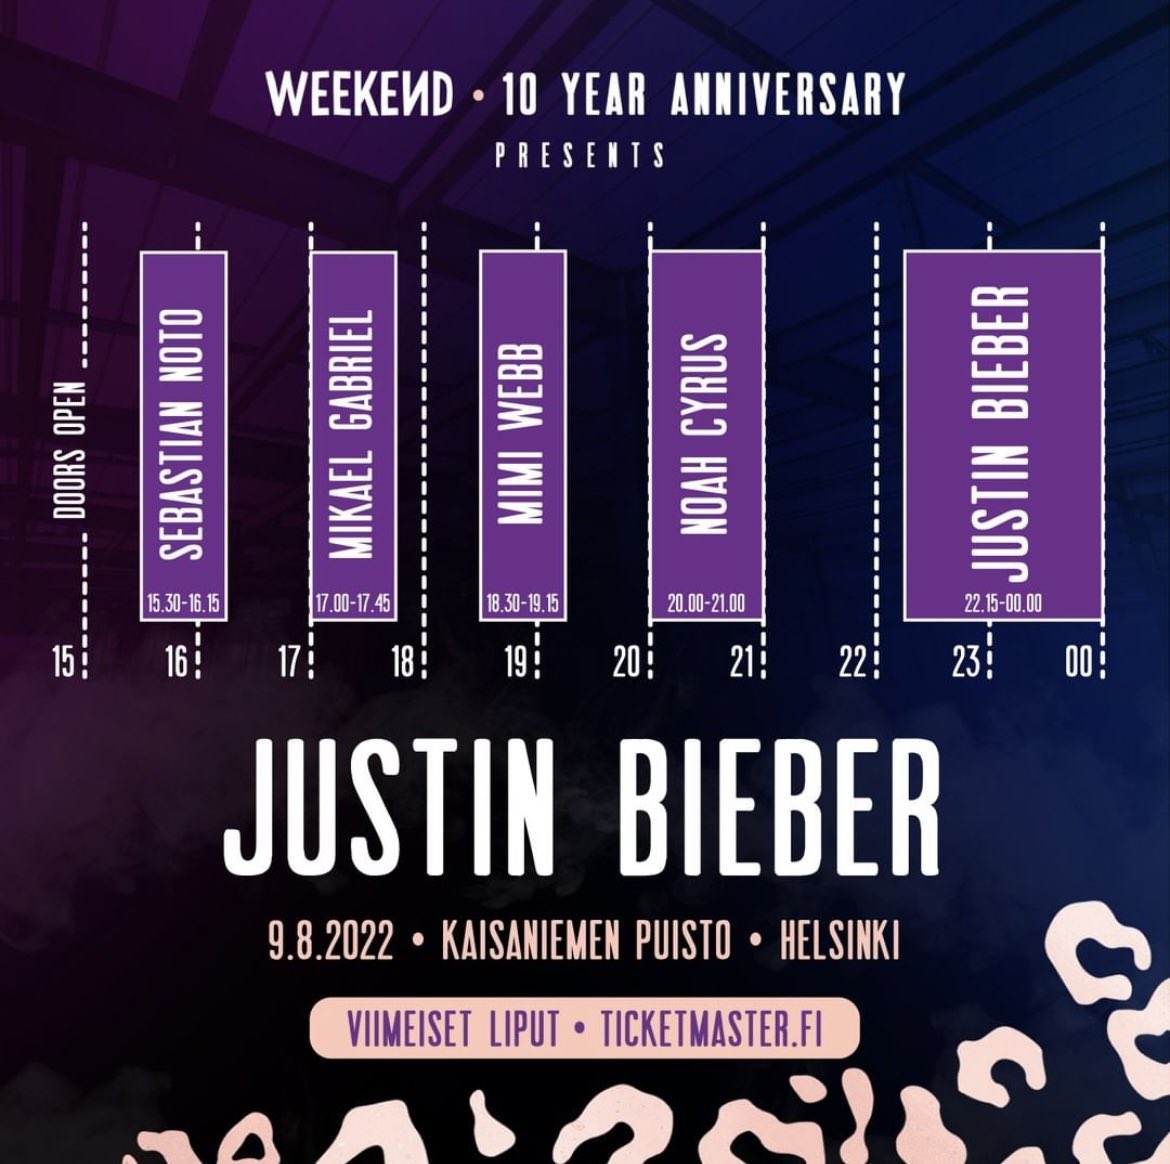 RT @JBCrewdotcom: If you are attending Justin Bieber’s Justice World Tour show in Helsinki, here is the schedule: https://t.co/ZagR8tPmoM